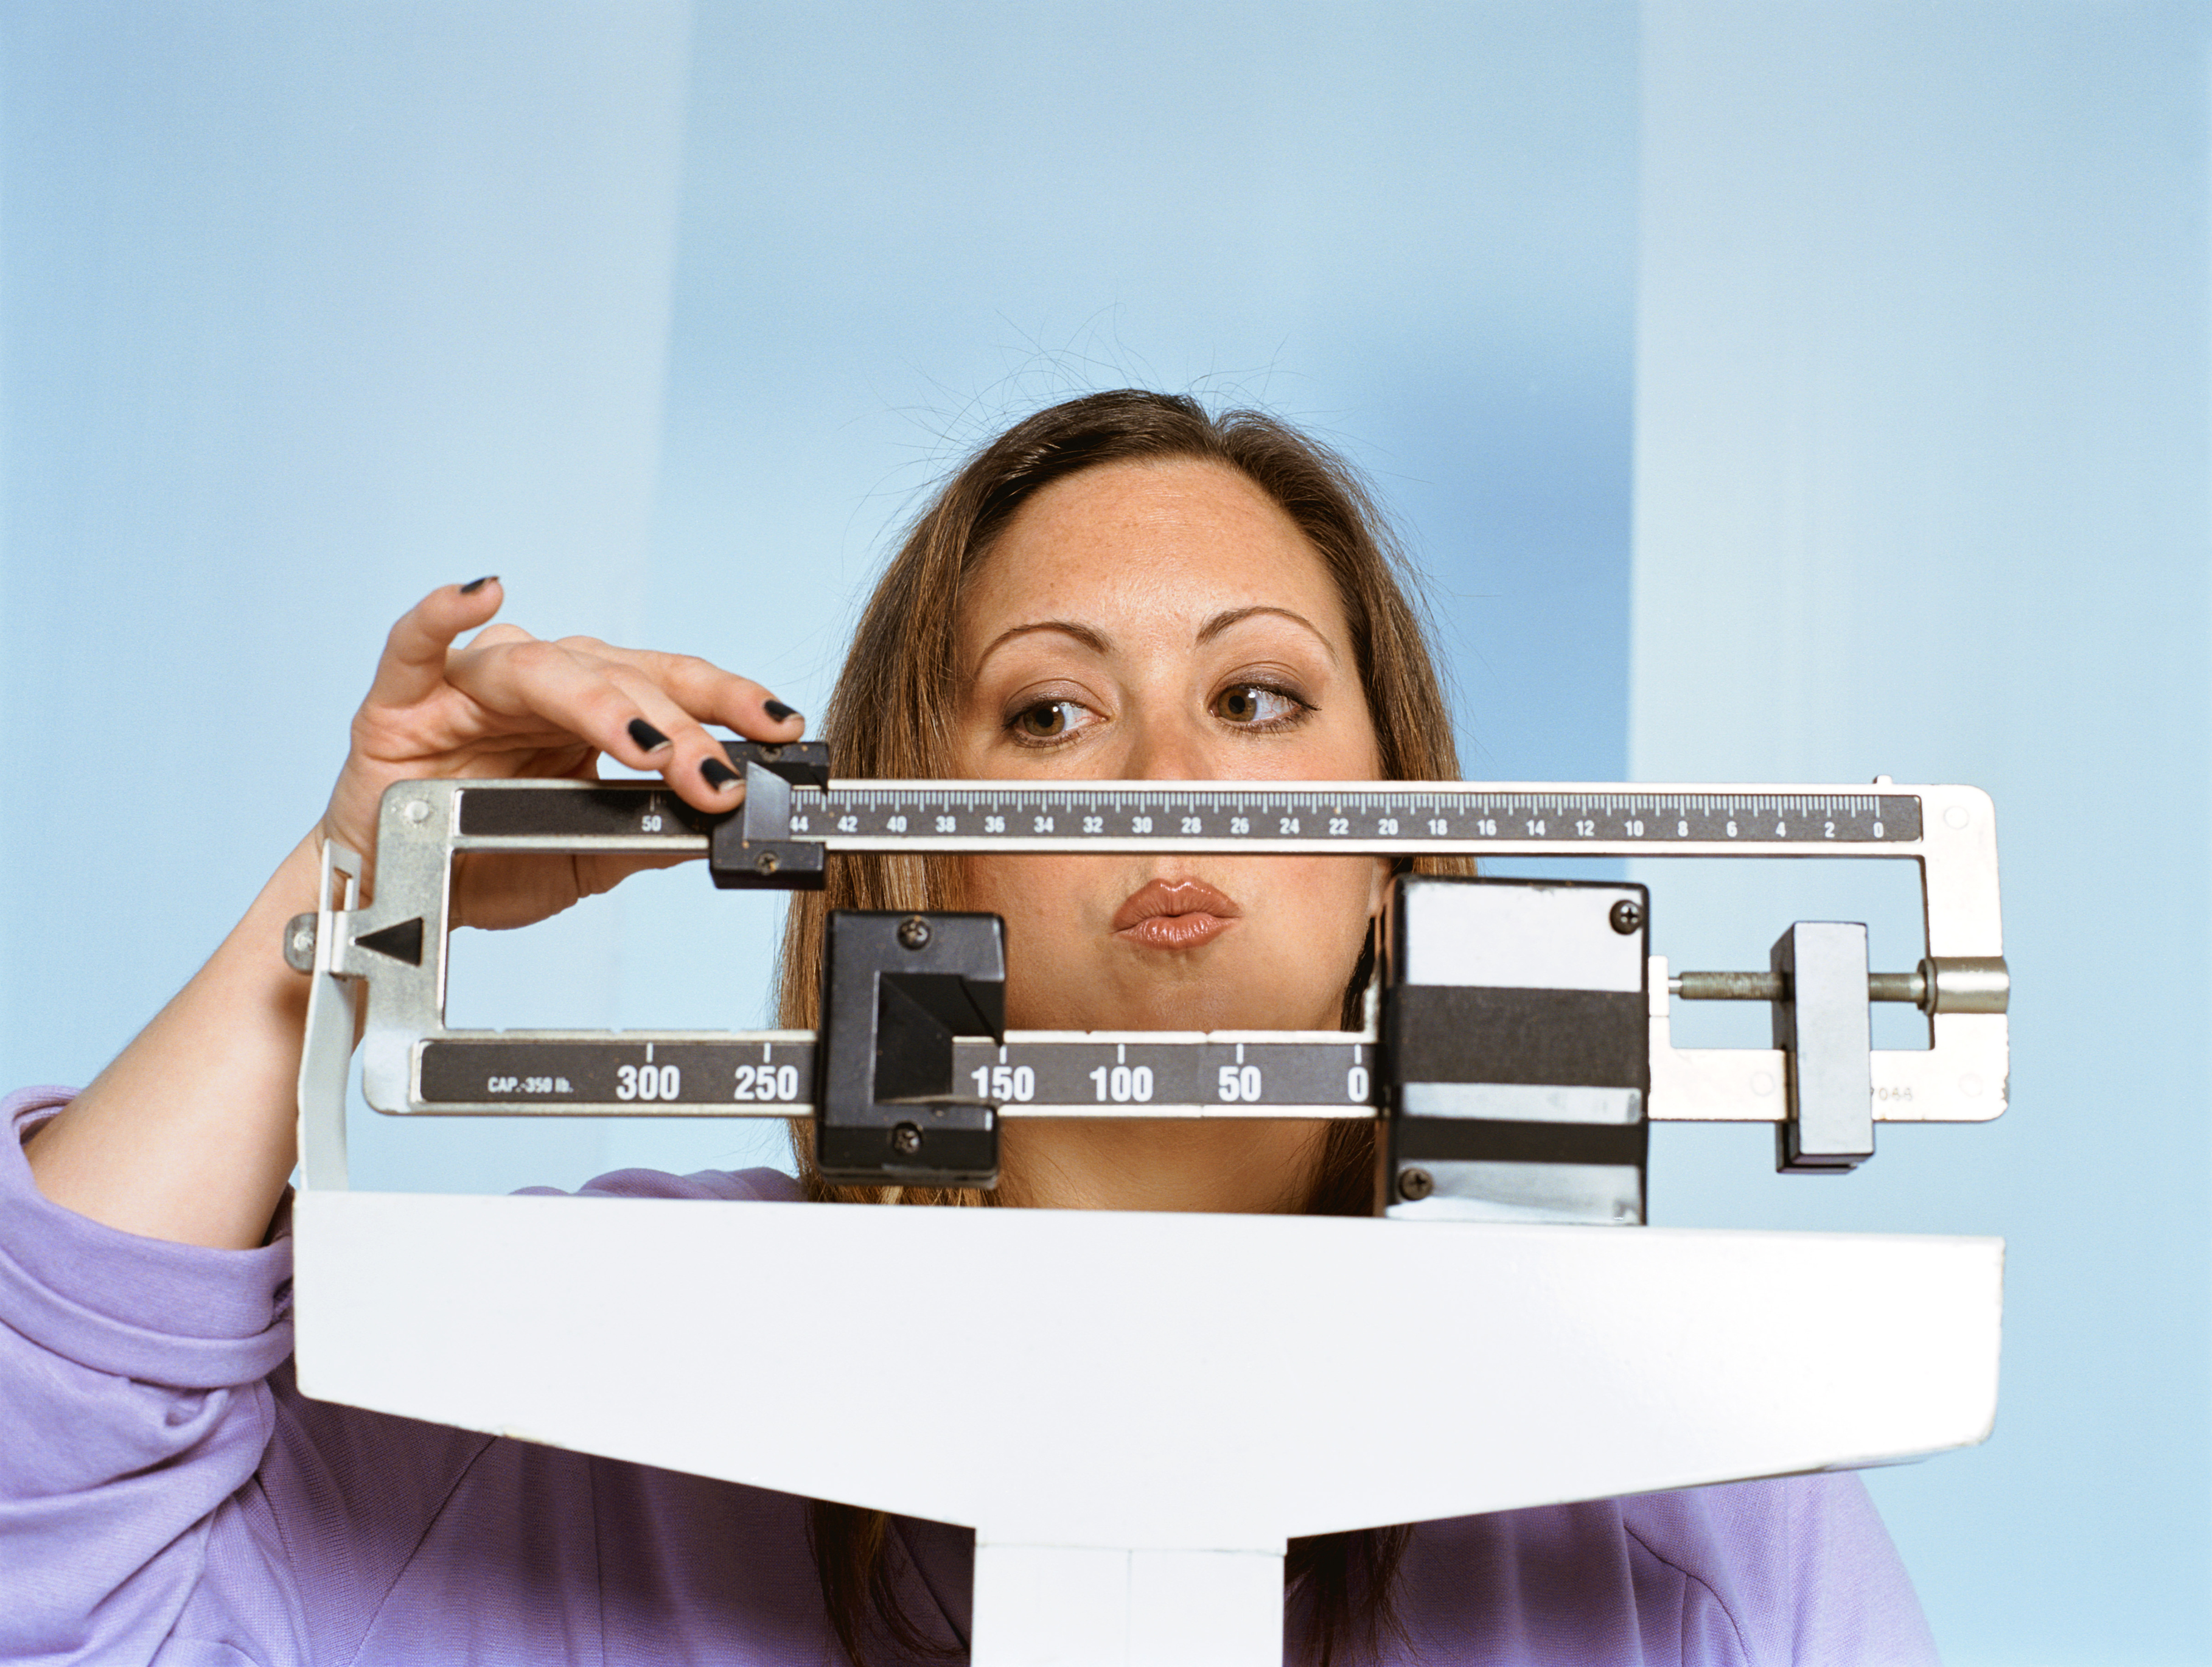 Generic photo of woman on a weighing scales